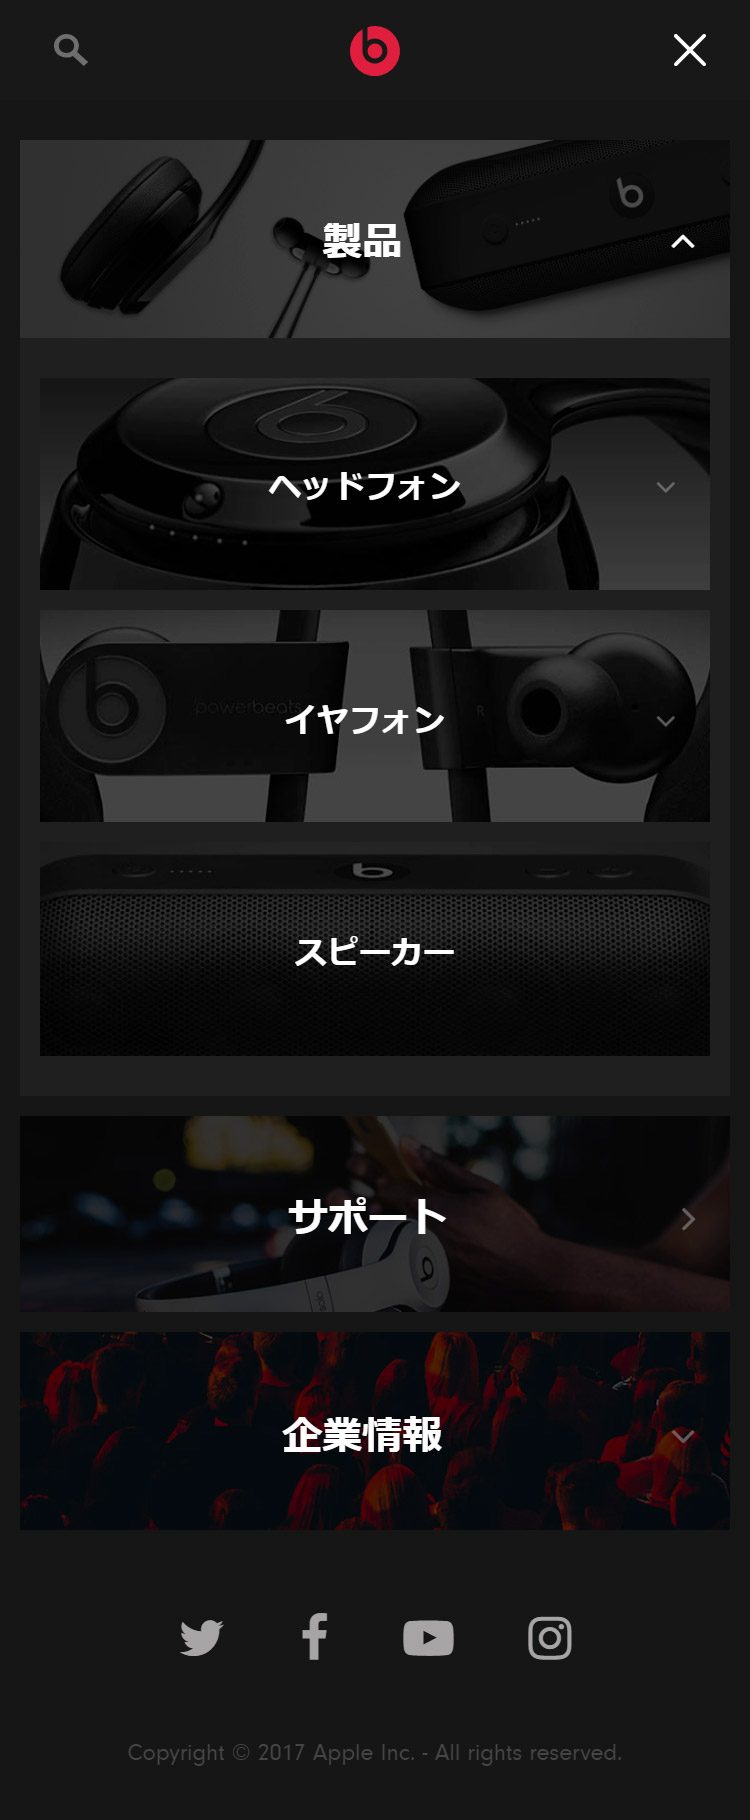 Beats by Dr. Dre メニュー